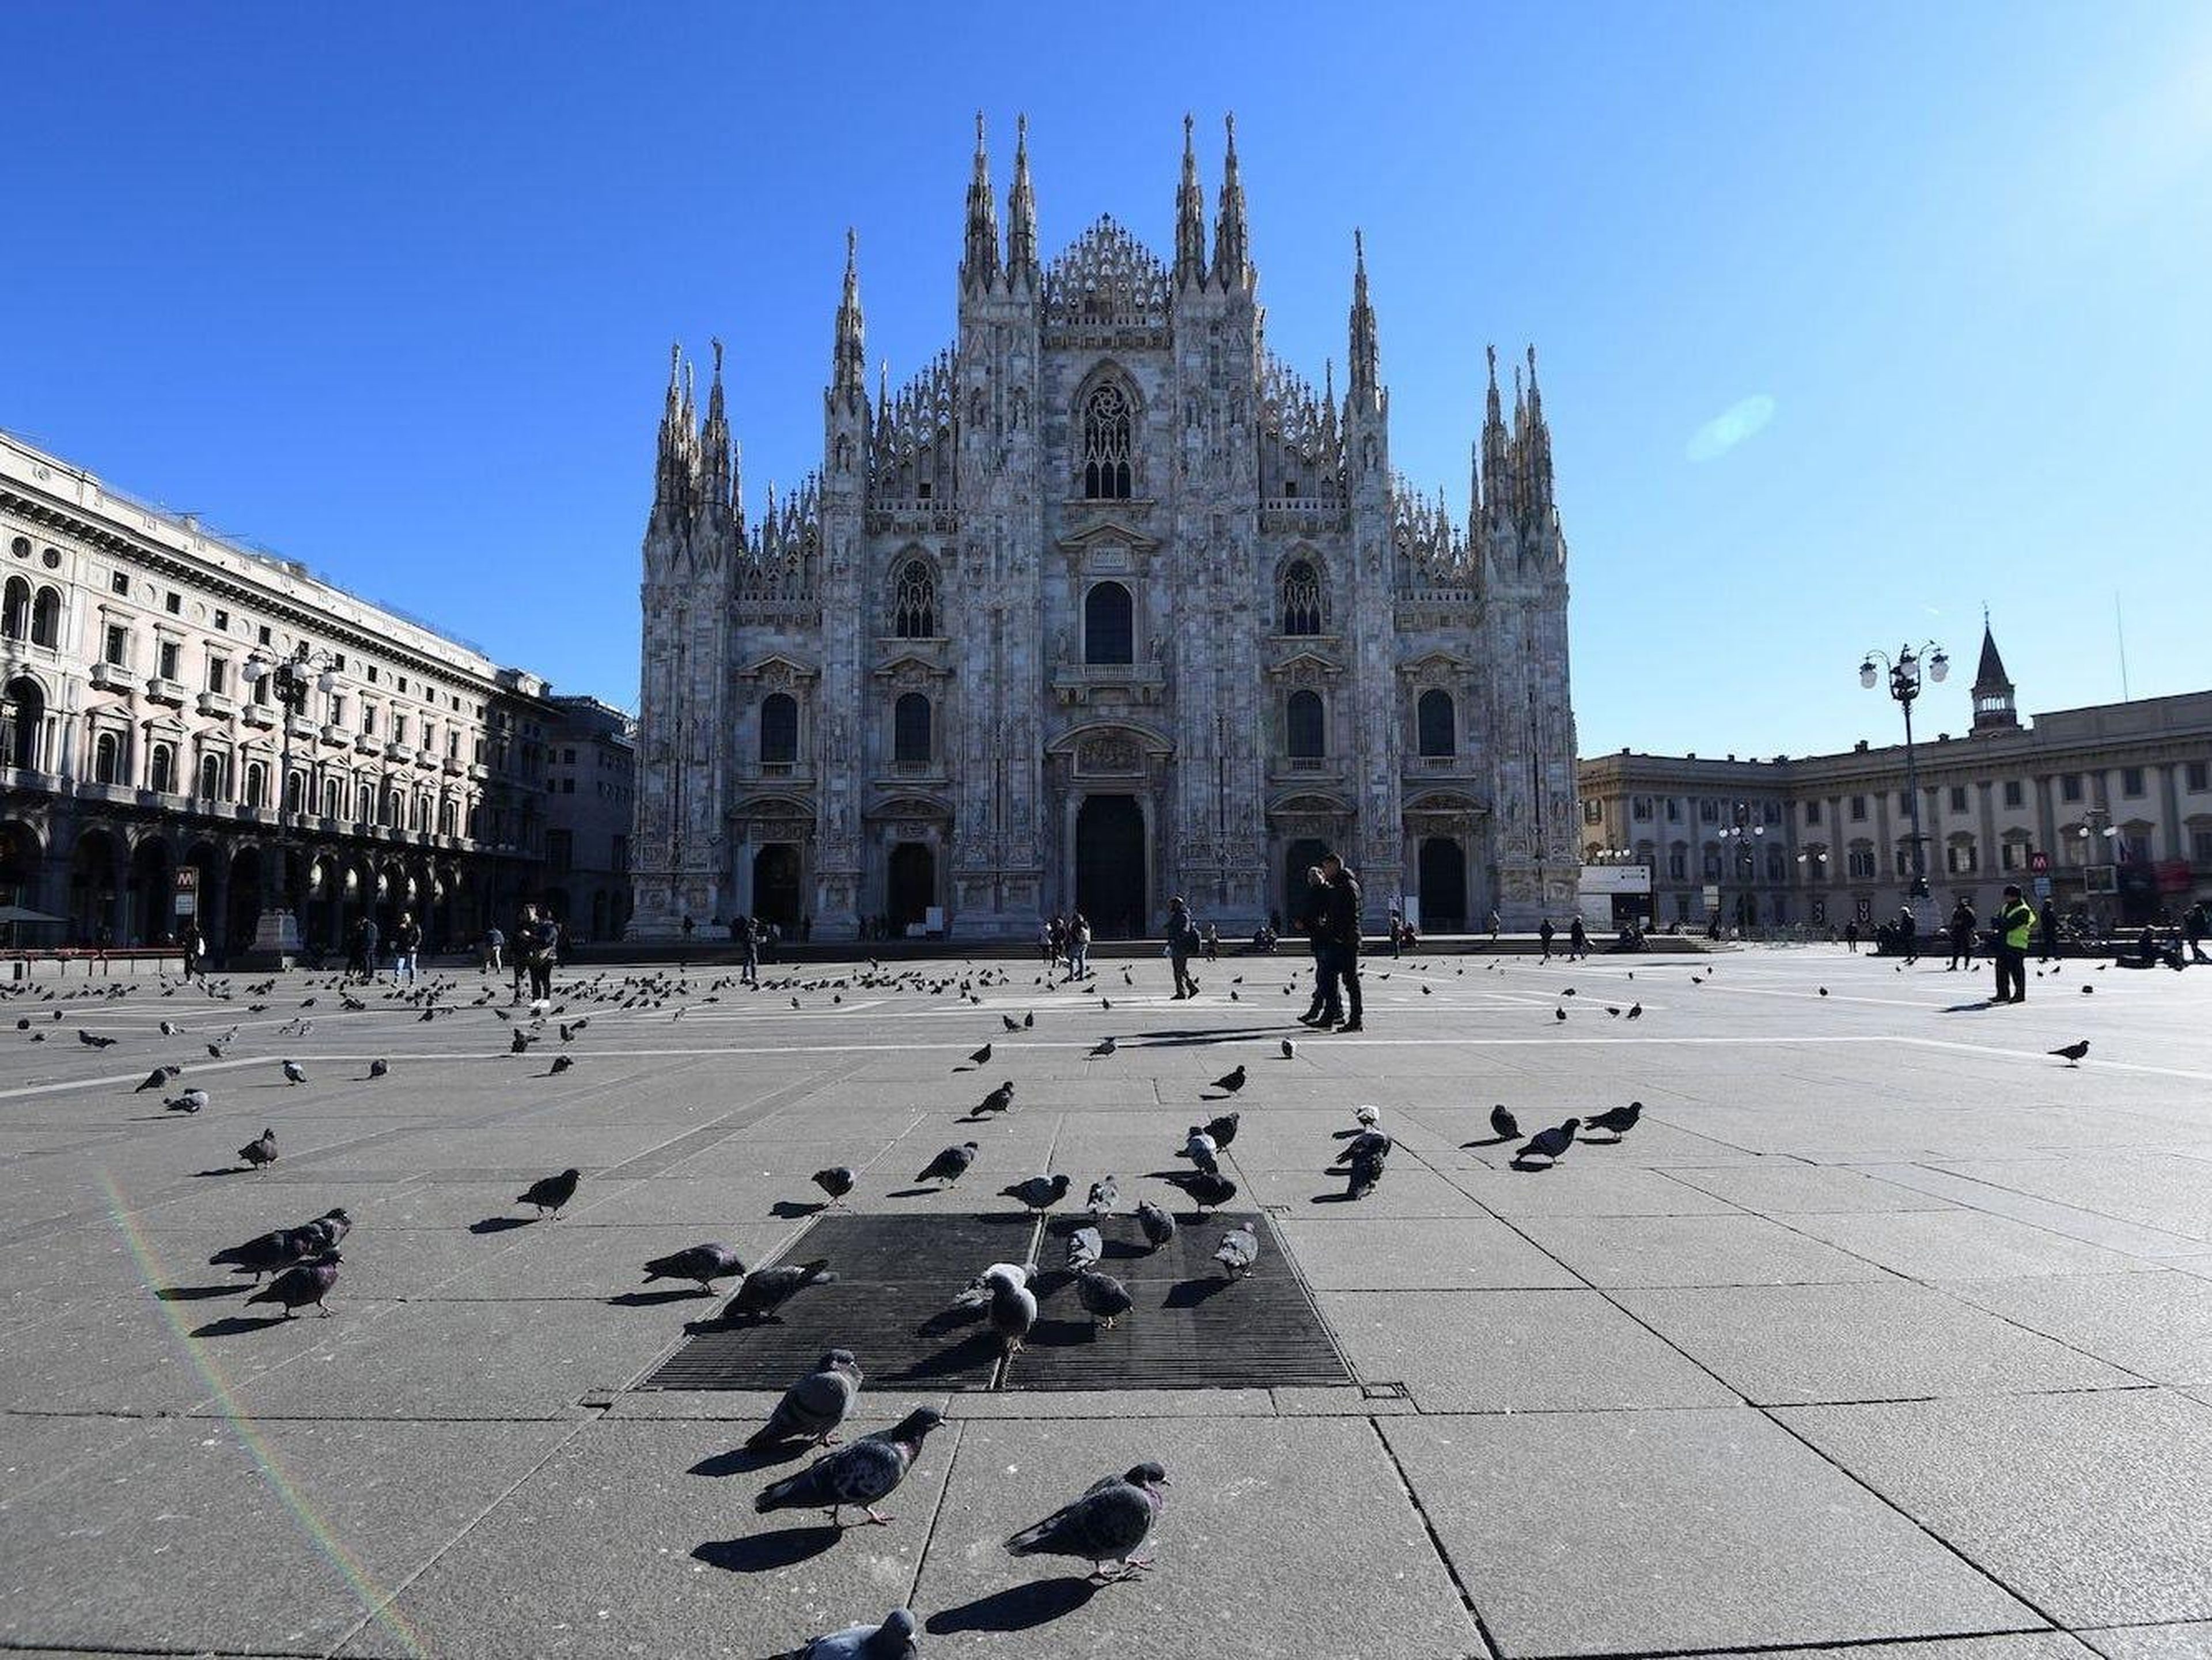 AFTER: With Italy on lockdown, few venture outside. The Duomo closed its doors to visitors on February 25.